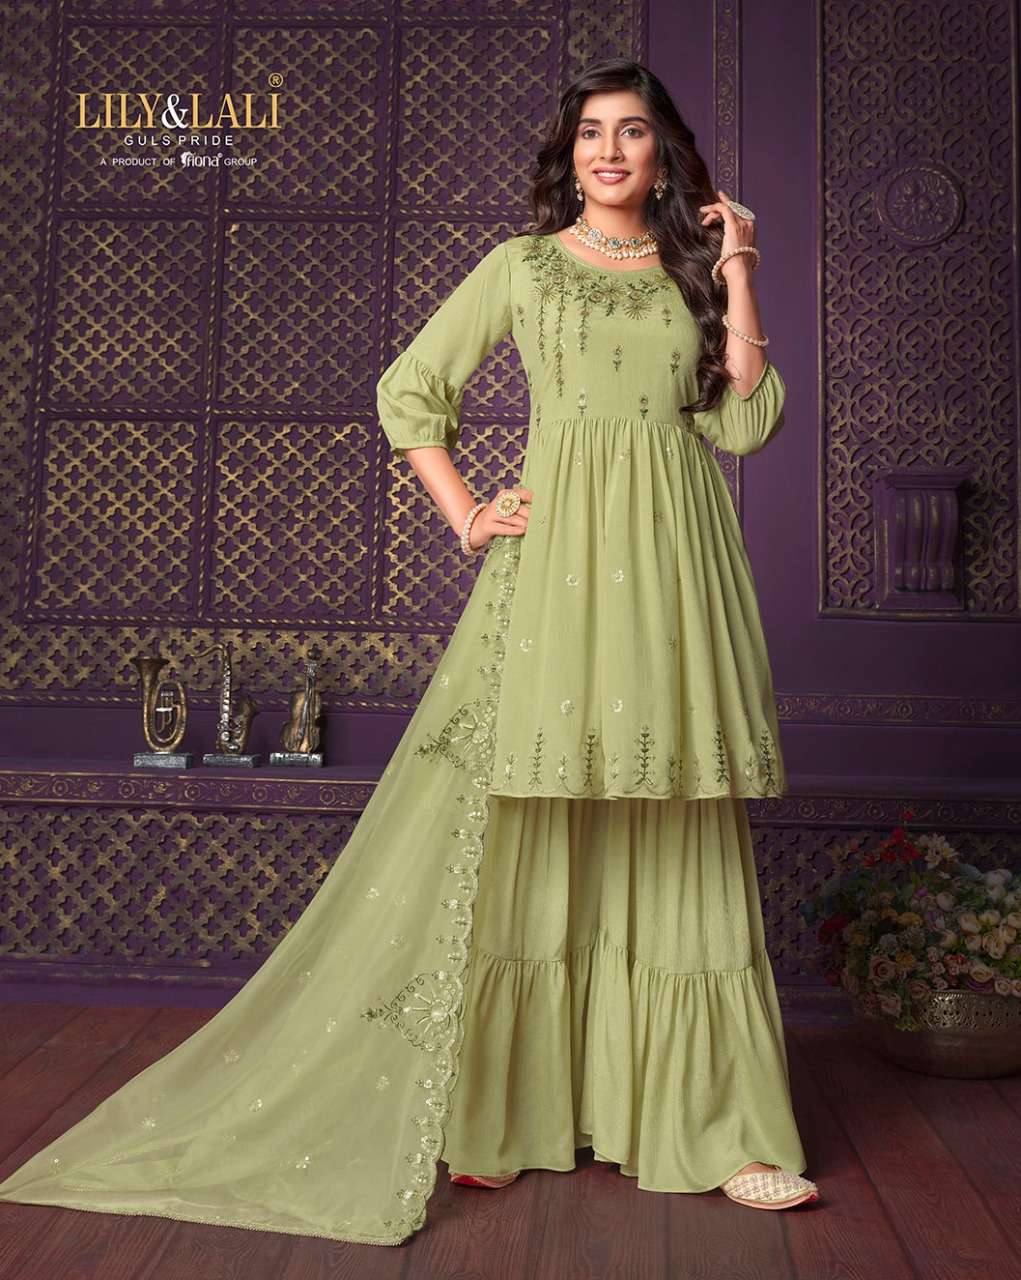 lily and lali eminent vol-2 10161-10166 series exclusive designer party wear drees collection surat 